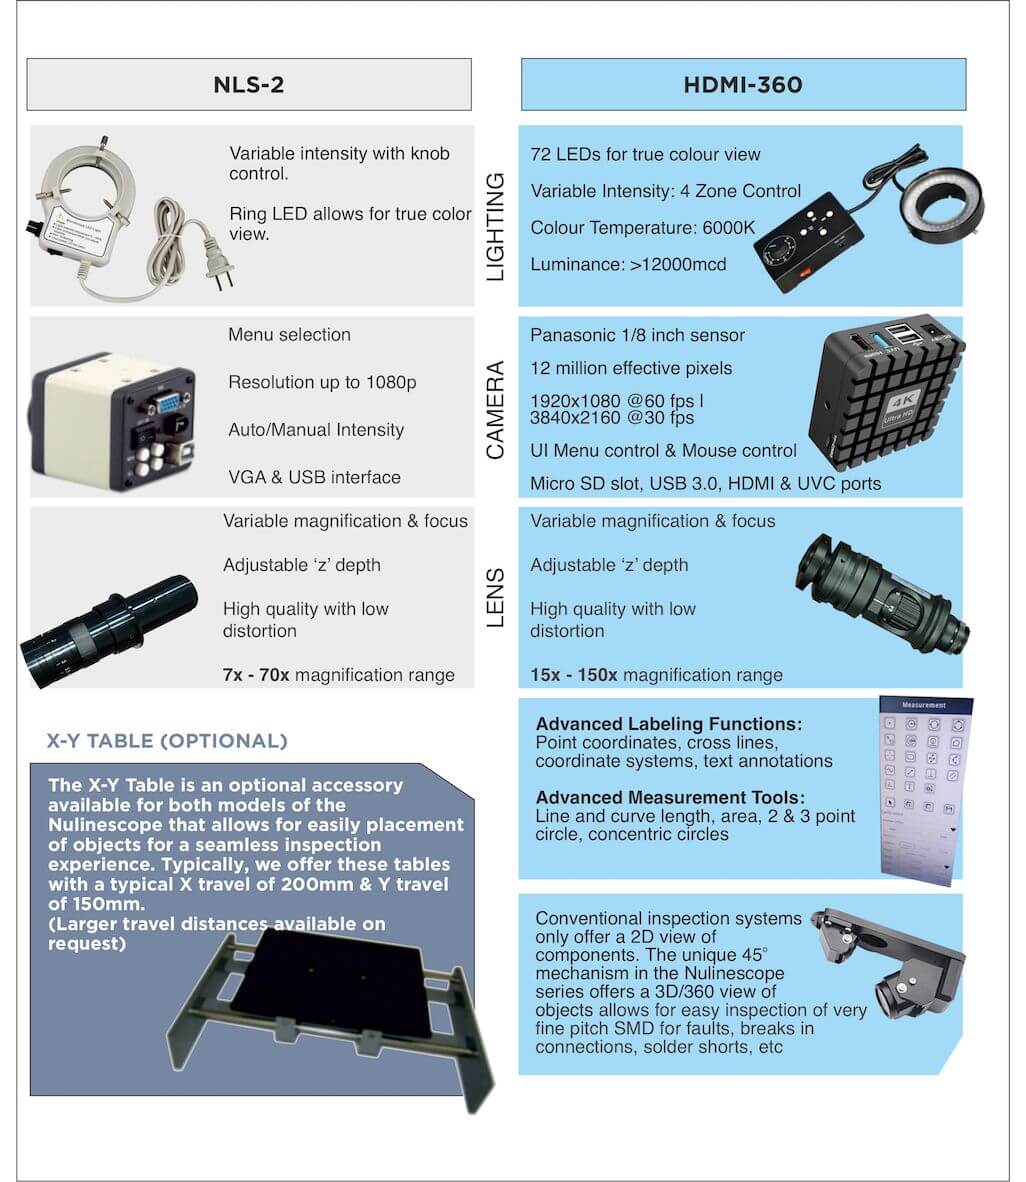 Visual inspection system specifications